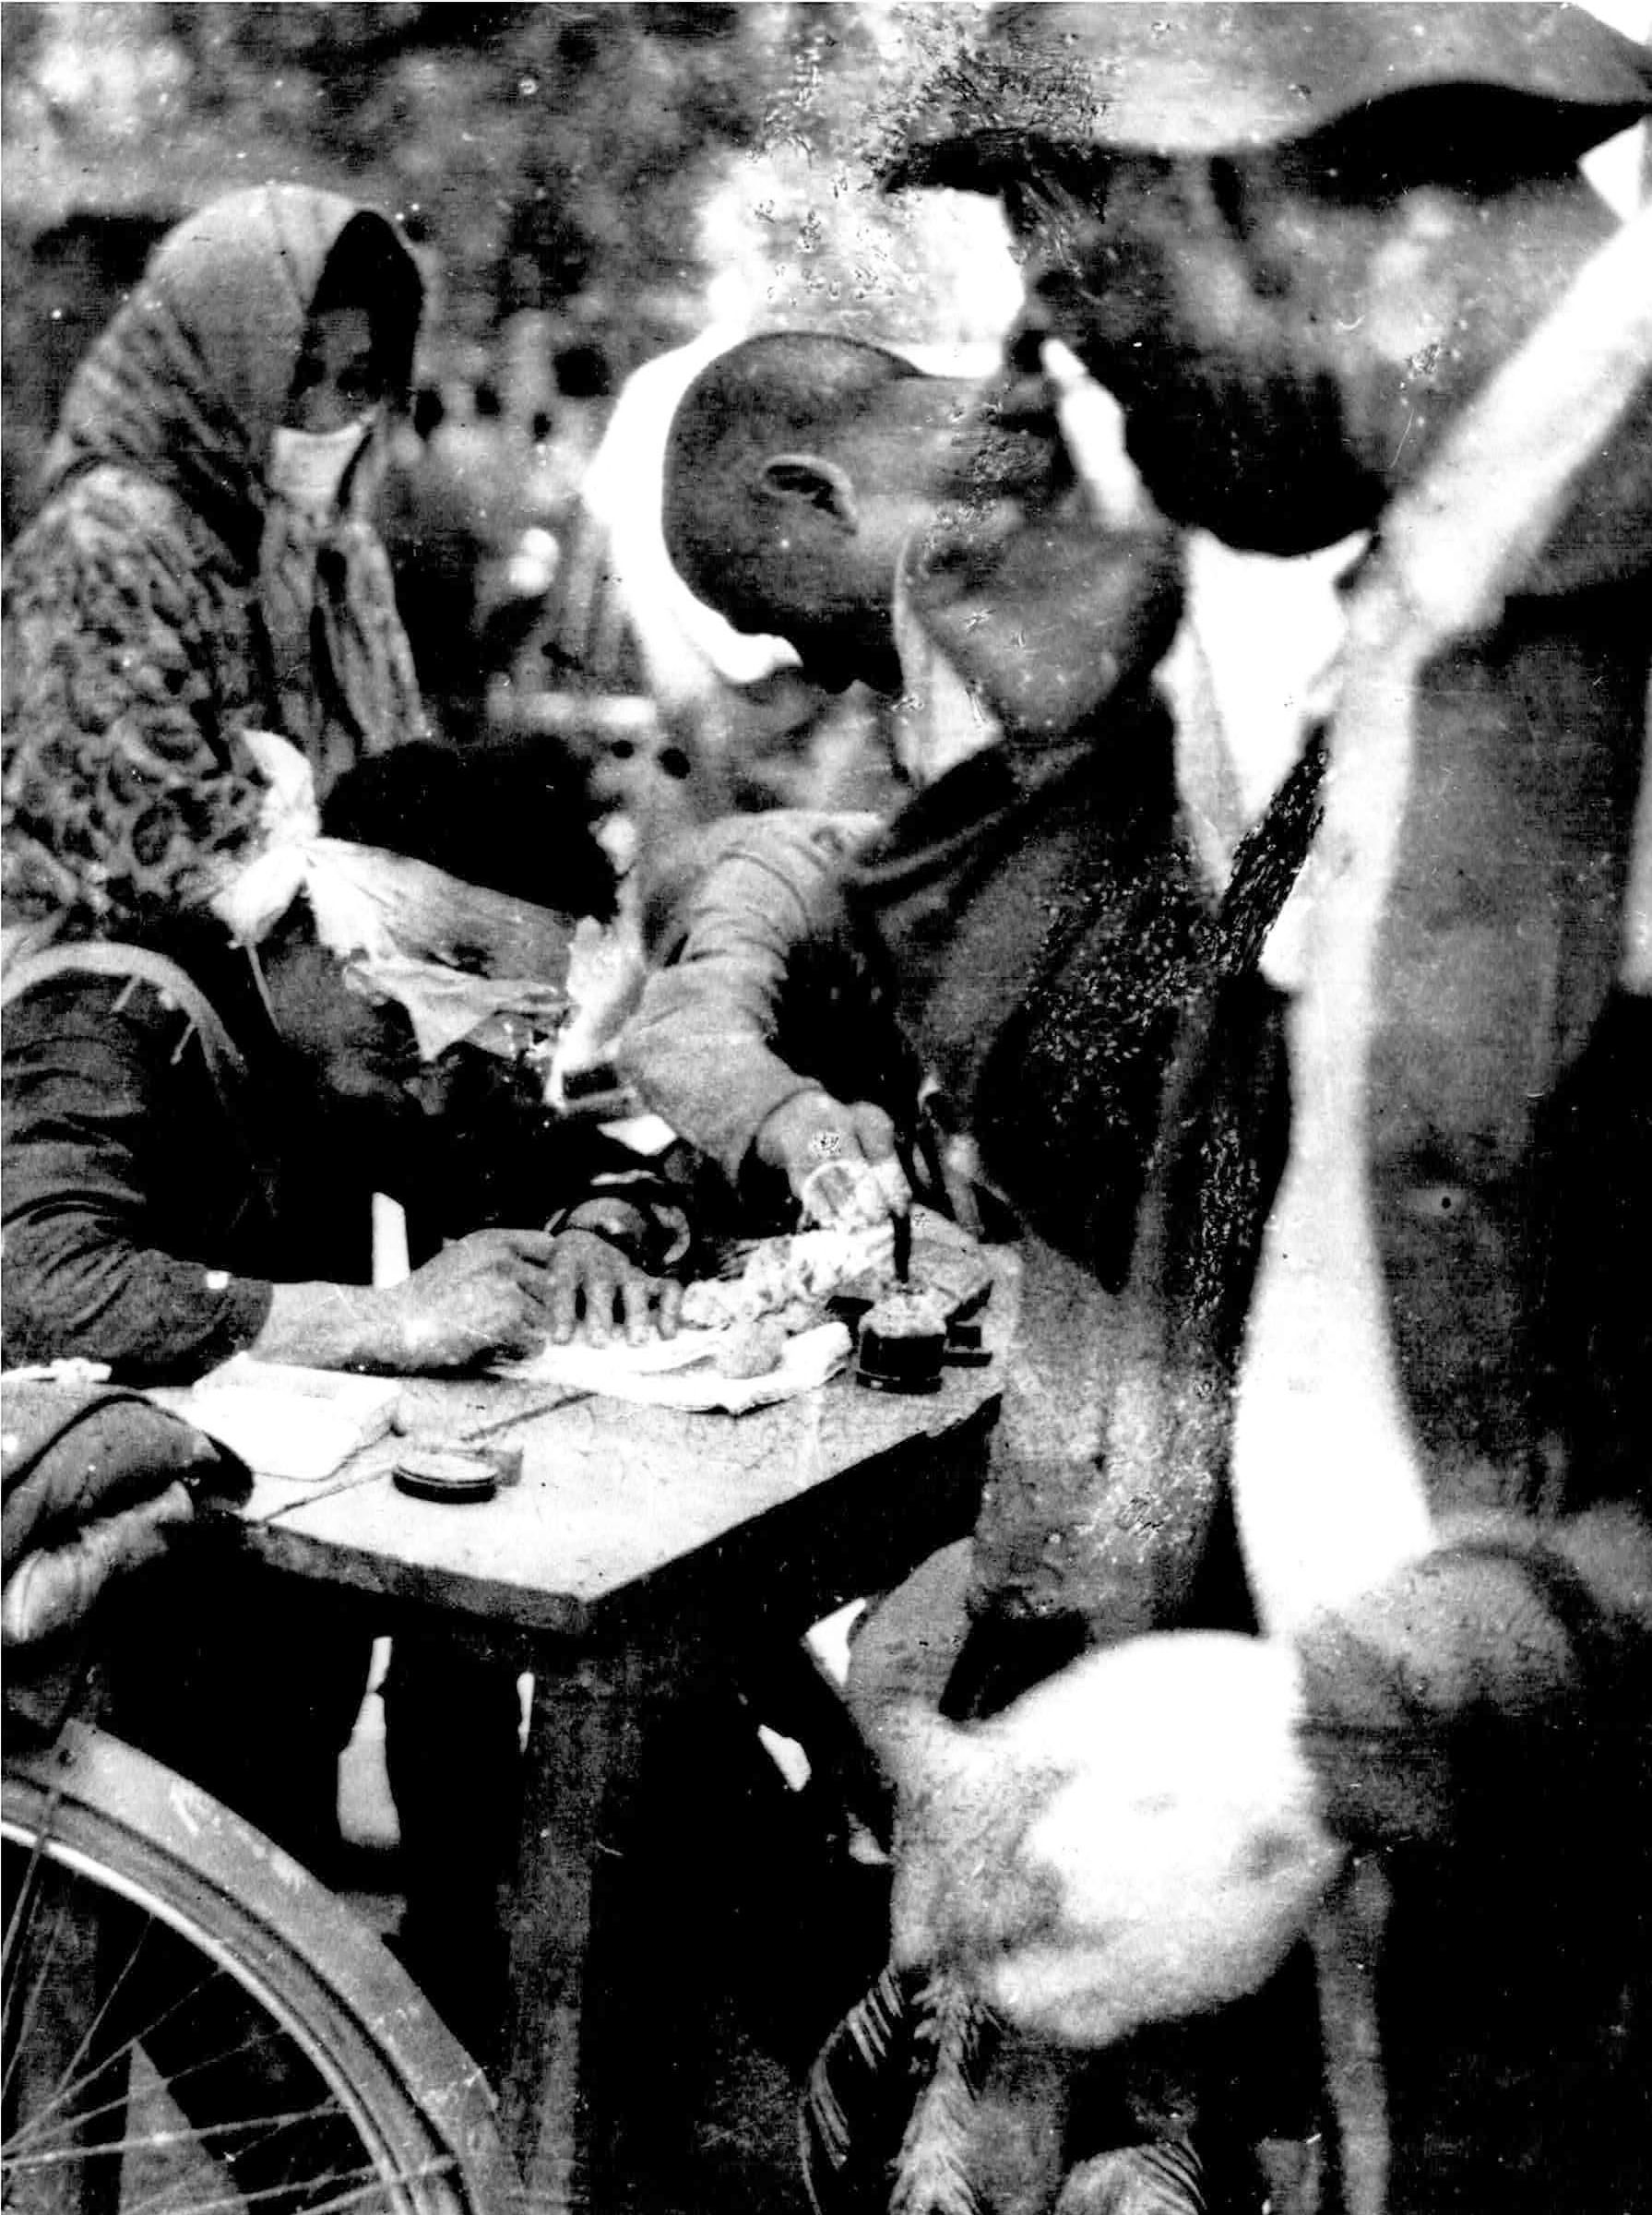 A police officer is shown sitting at a table while wearing a bandage on his head and writing on paper with several people standing around him.